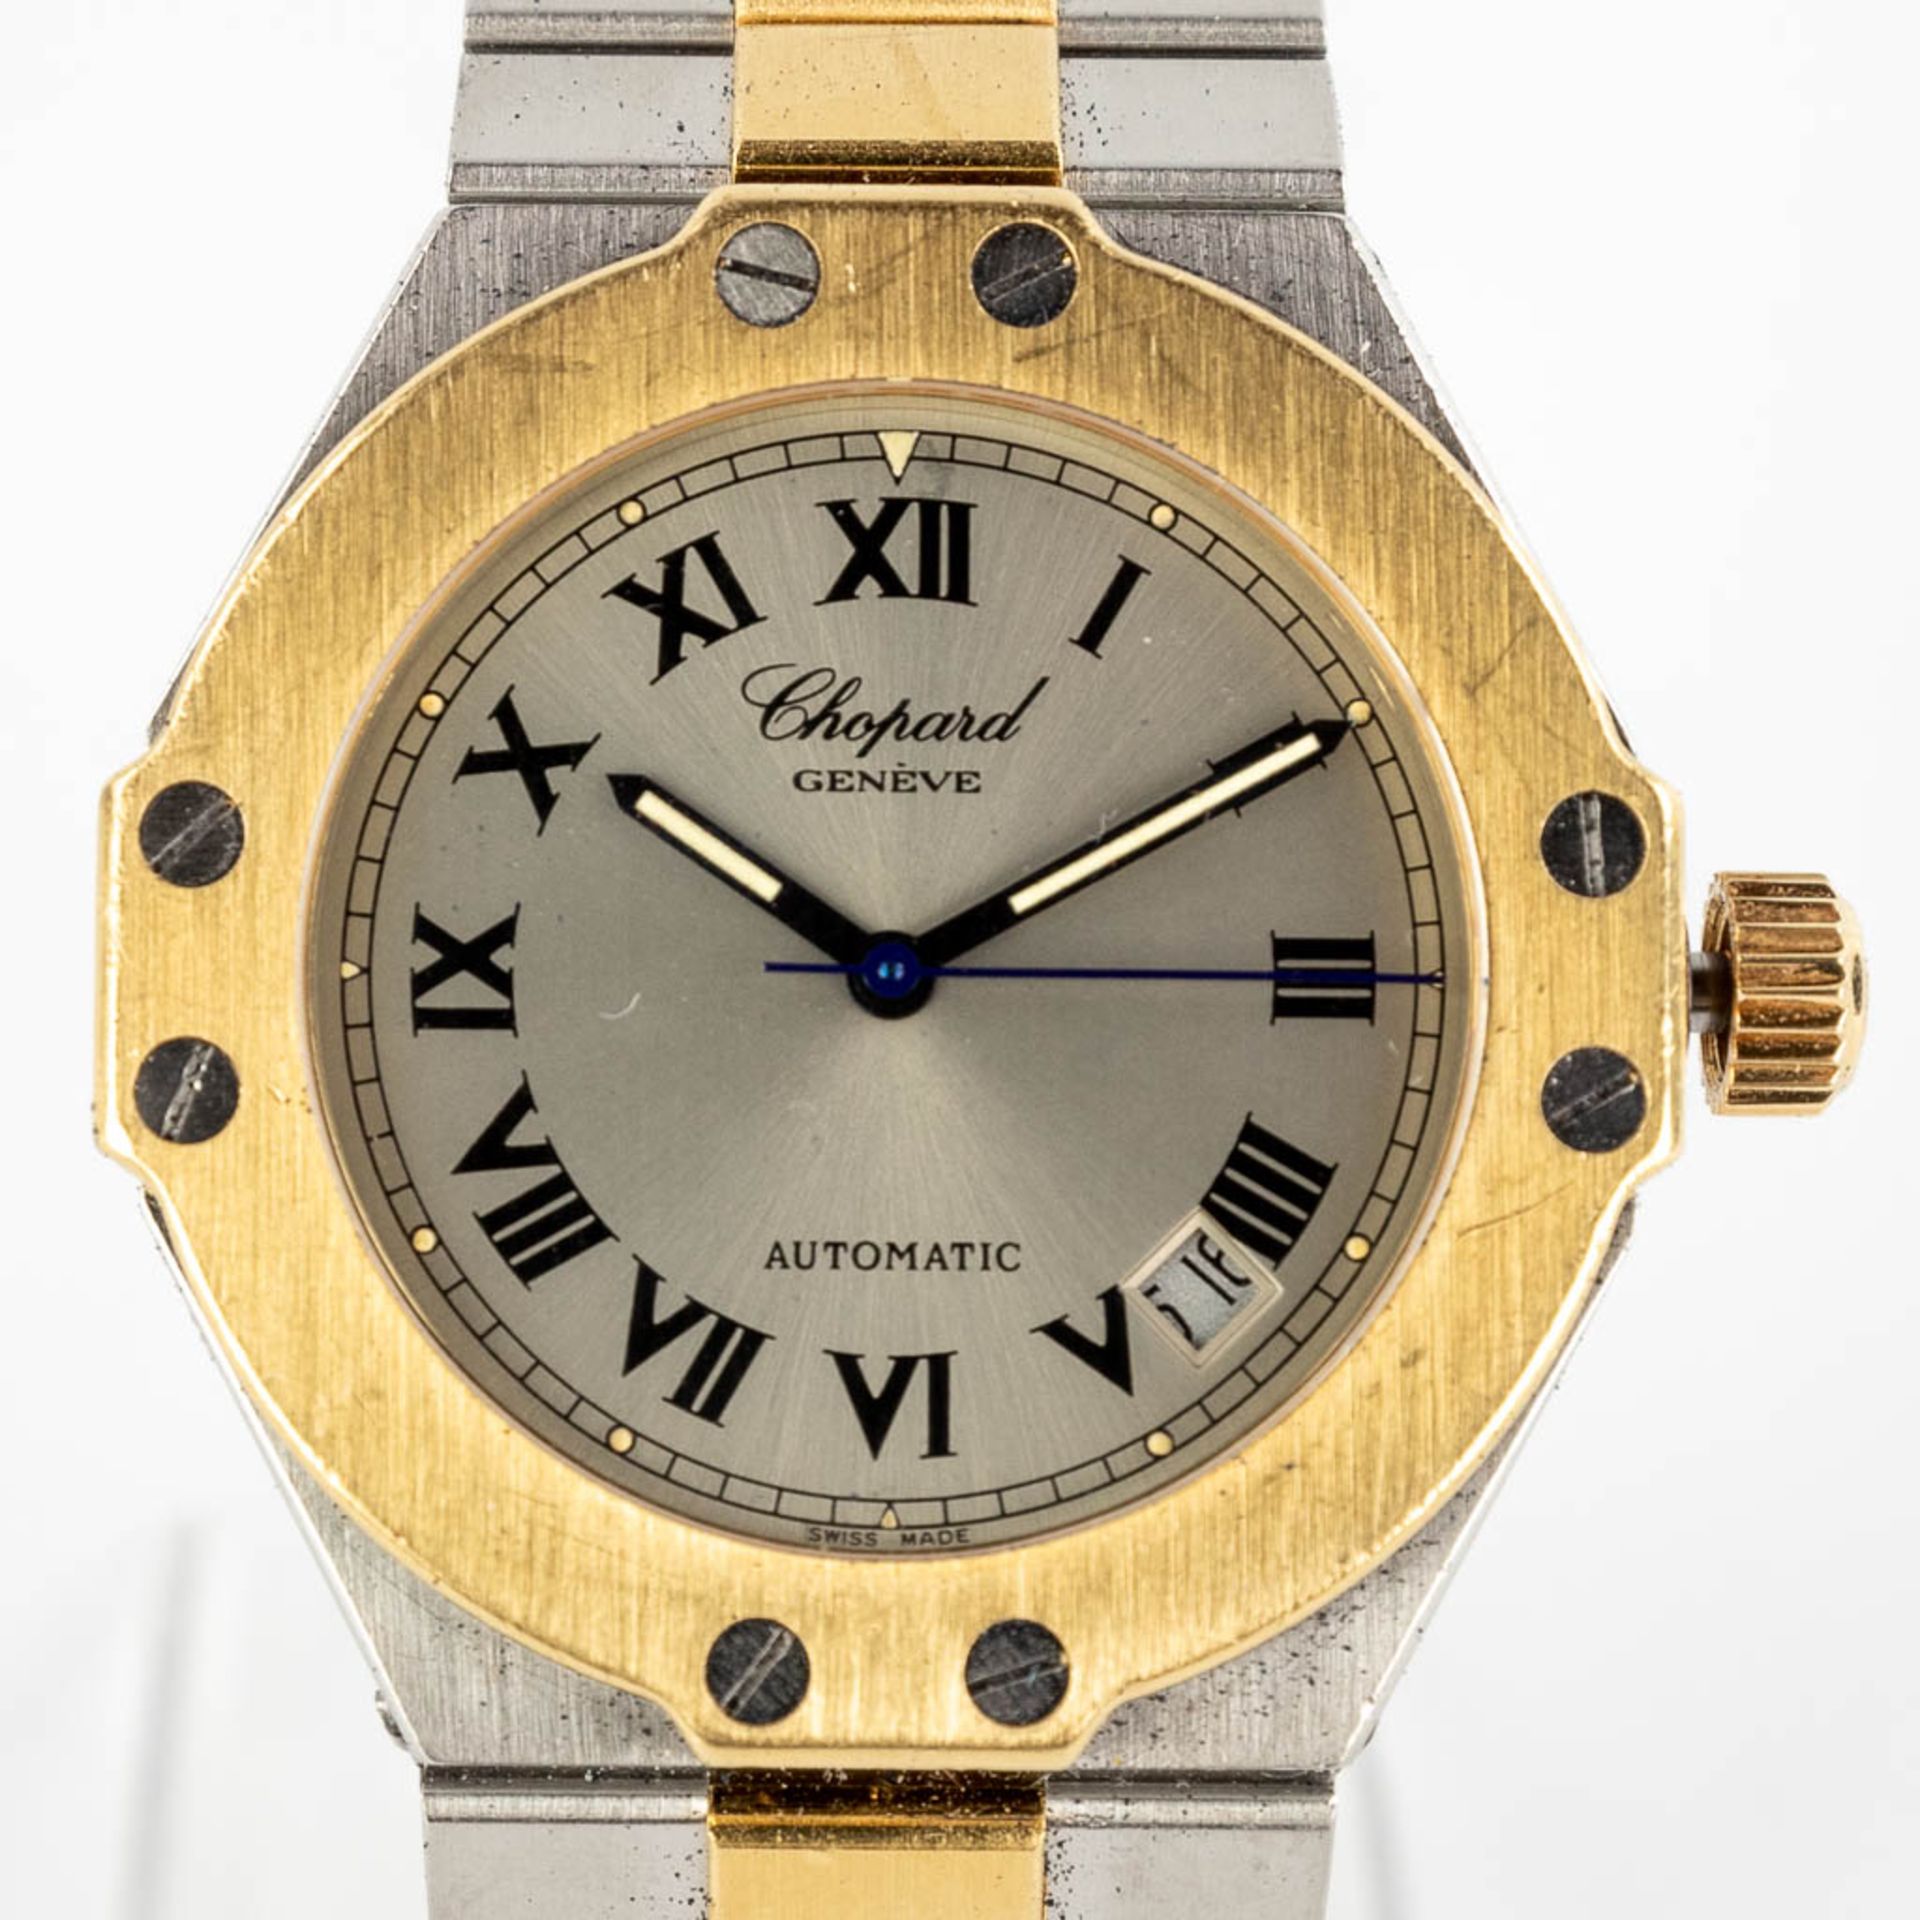 Chopard Saint Moritz, a men's wristwatch, 18kt yellow gold and steel. Box and papers. Reference 8300 - Image 7 of 16